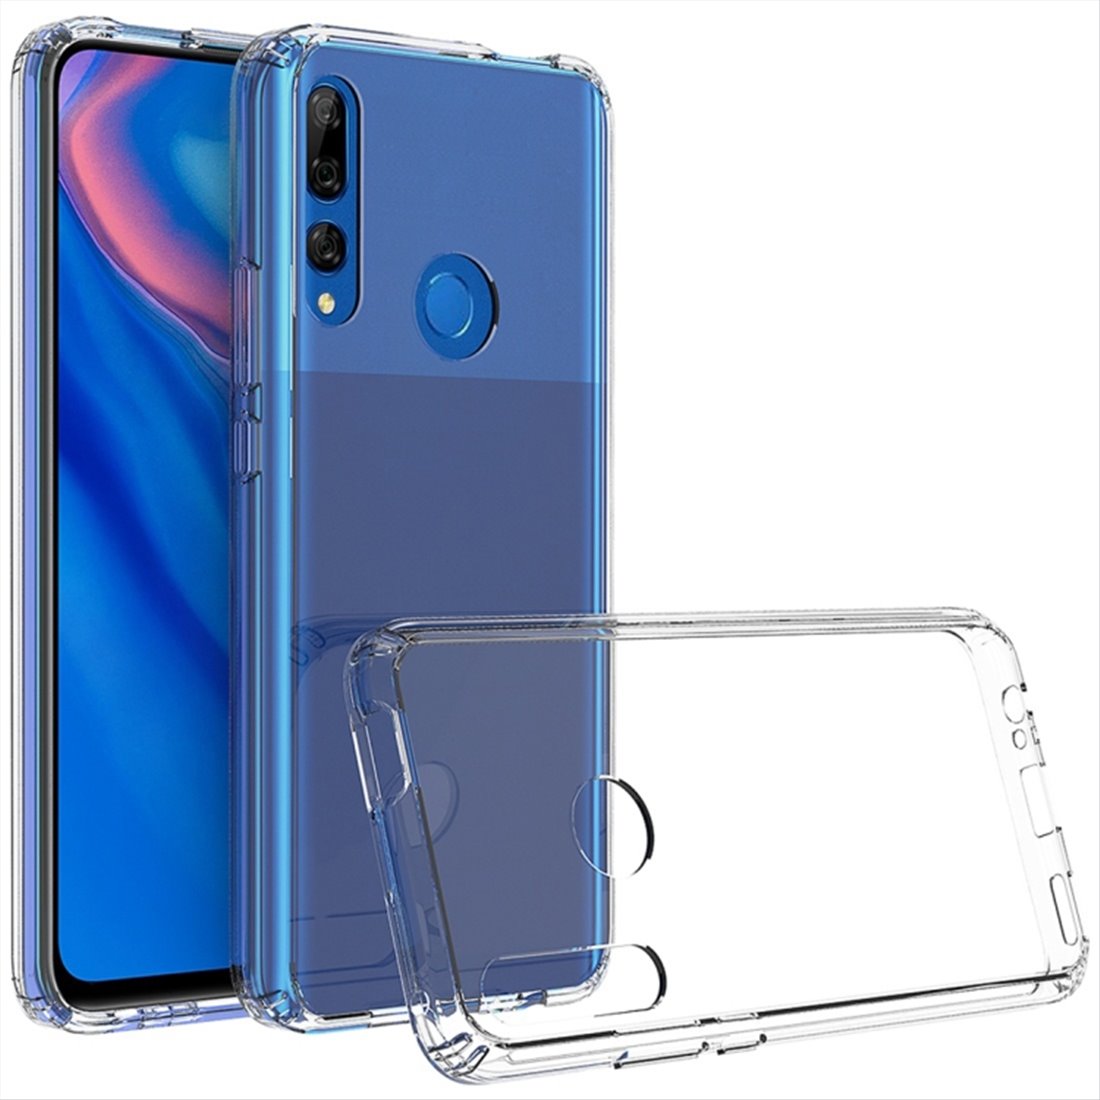 Huawei Y9 prime (2019) silicone Transparent Back Cover Smartphone Case